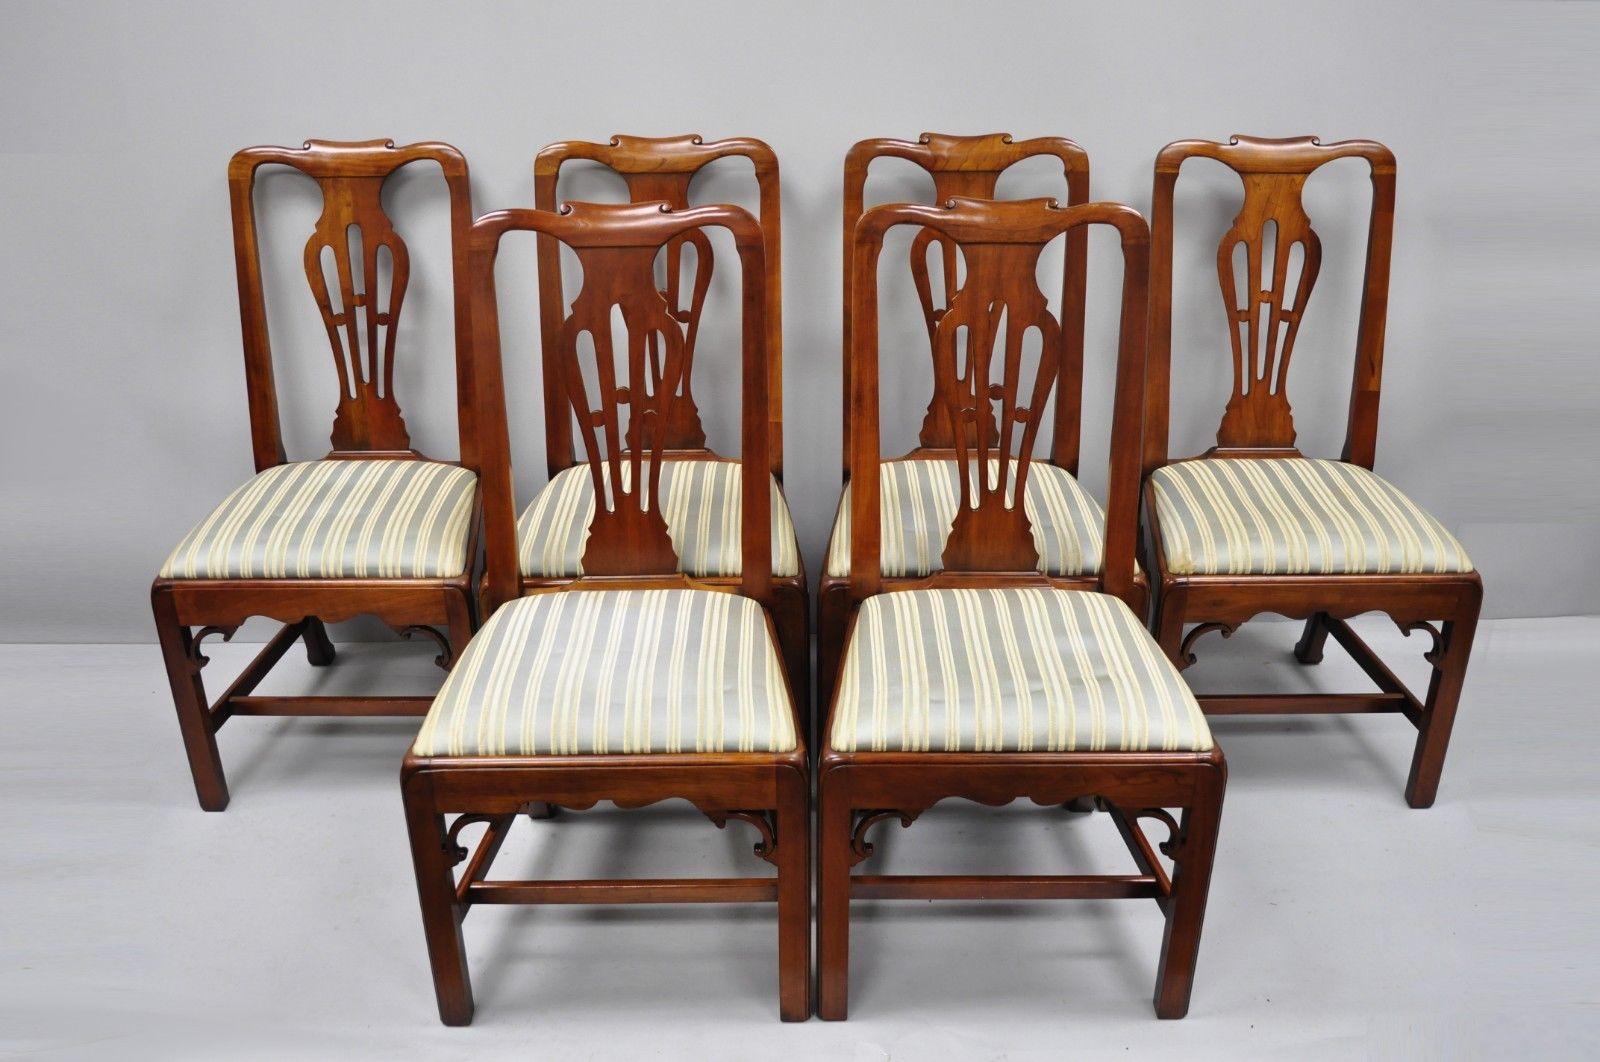 6 Statton Centennial Cherry Chippendale Style Dining Chairs for Duckloe 1